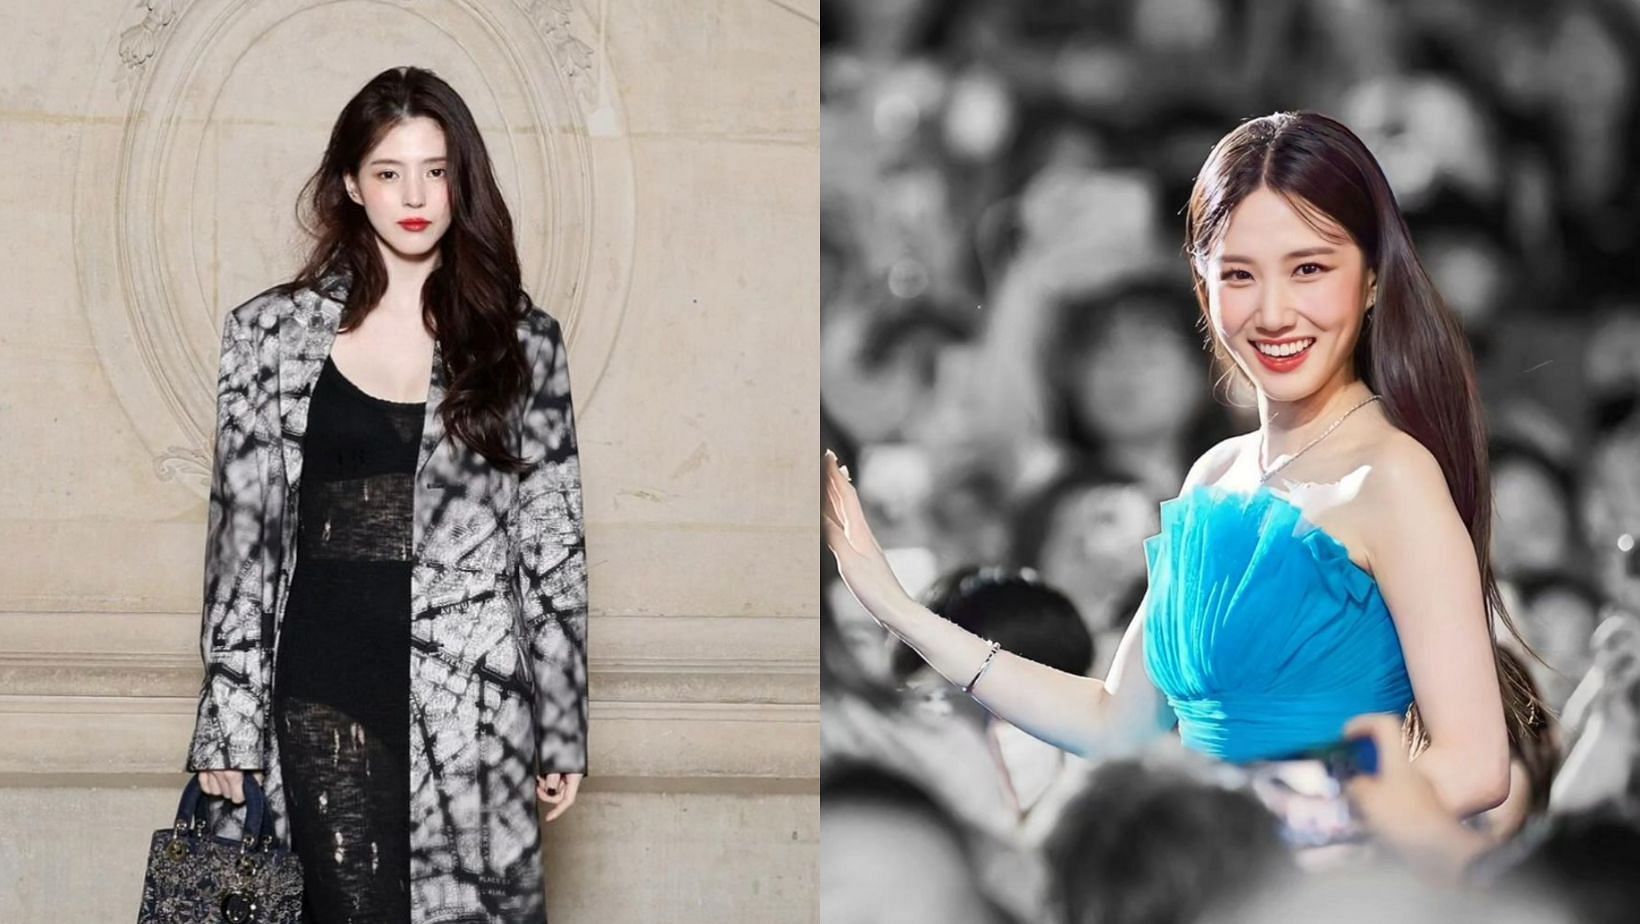 Park Eun-bin and Han So-hee&rsquo;s fees for appearing in dramas reportedly to be around ₩300 million per episode. (Images via Instagram/@xeesoxee &amp; @eunbining0904)